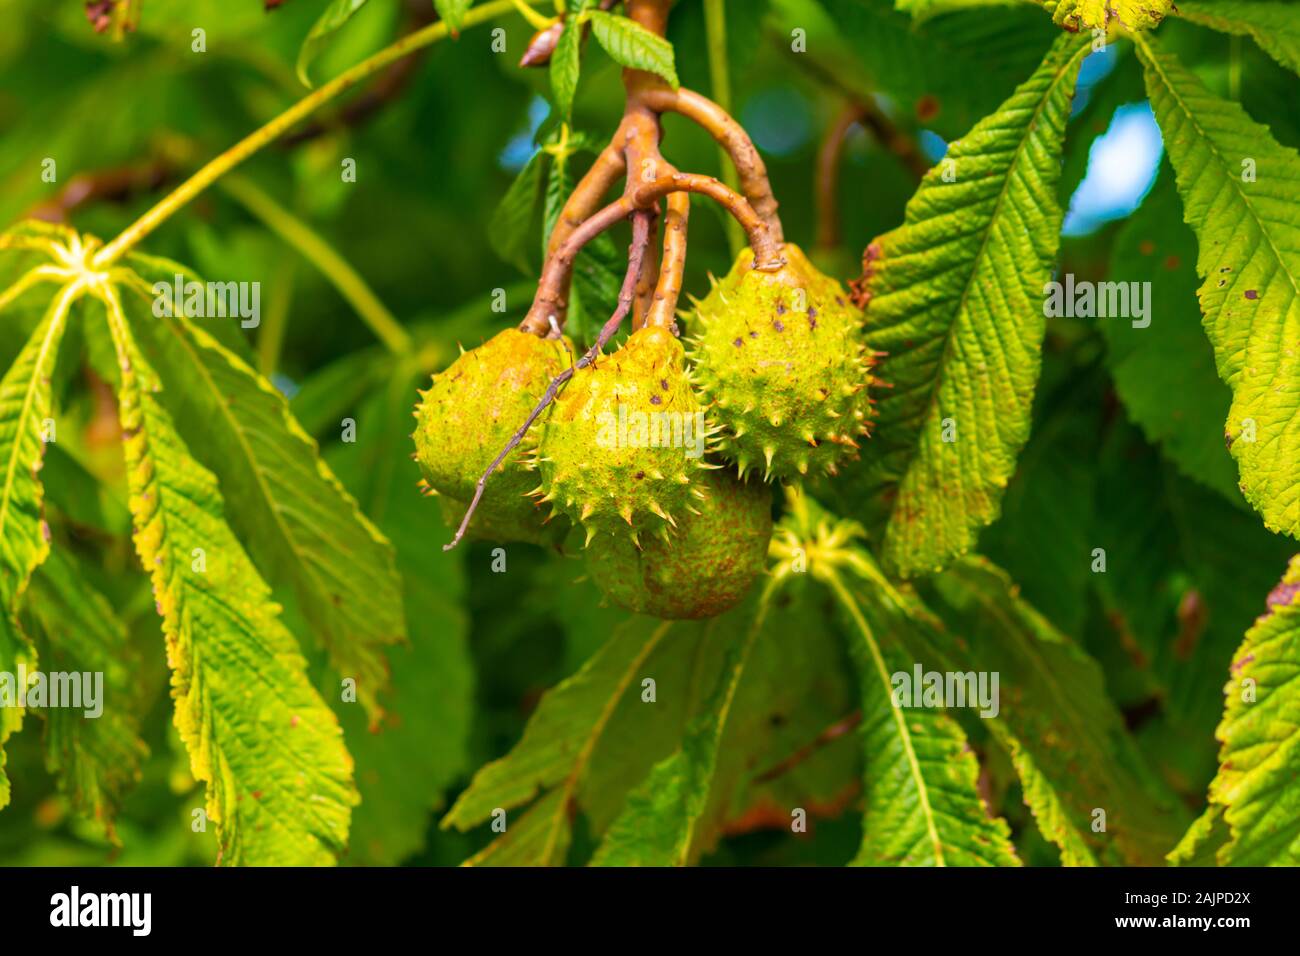 A cluster of conkers in their ripe spiky shells on a horse chestnut tree. Stock Photo